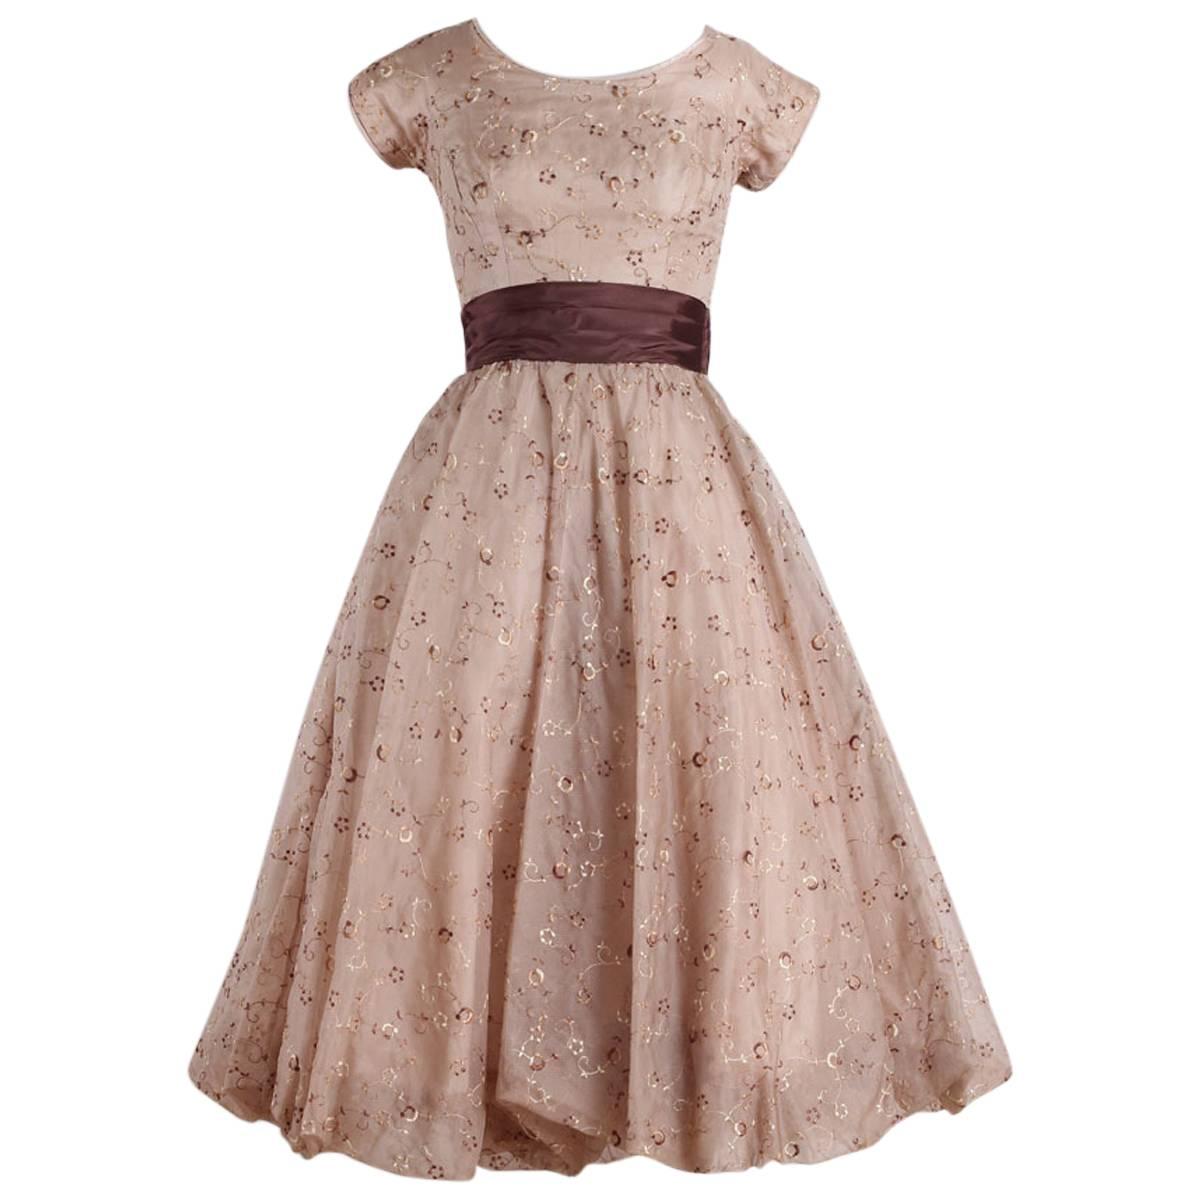 Vintage 1950s Mocha Embroidered Party Dress For Sale